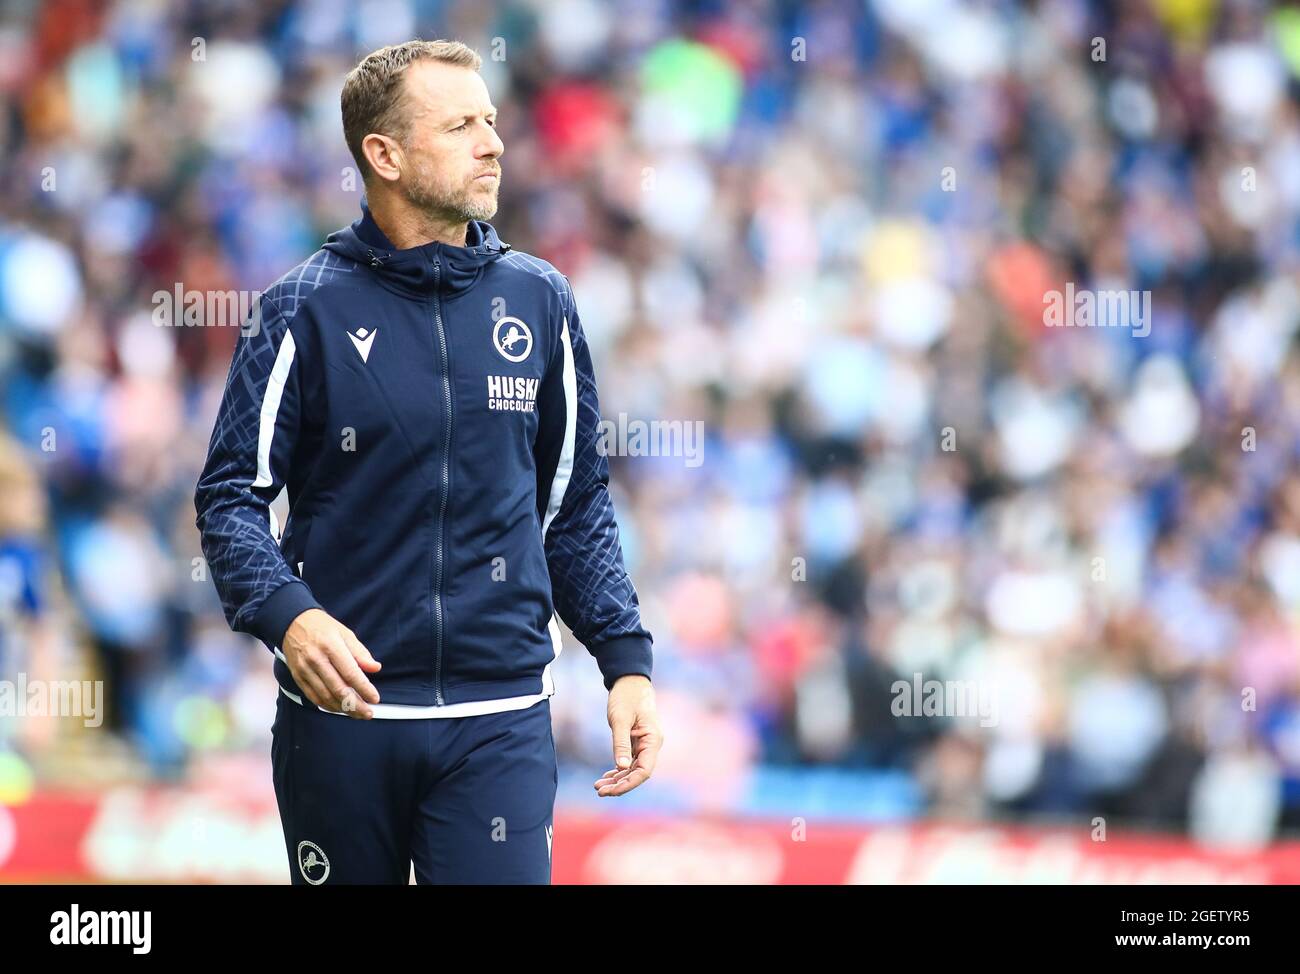 Cardiff City Stadium, Cardiff, Royaume-Uni. 21 août 2021. EFL Championship football, Cardiff City versus Millwall ; Gary Rowett, Manager de Millwall Credit: Action plus Sports/Alay Live News Banque D'Images